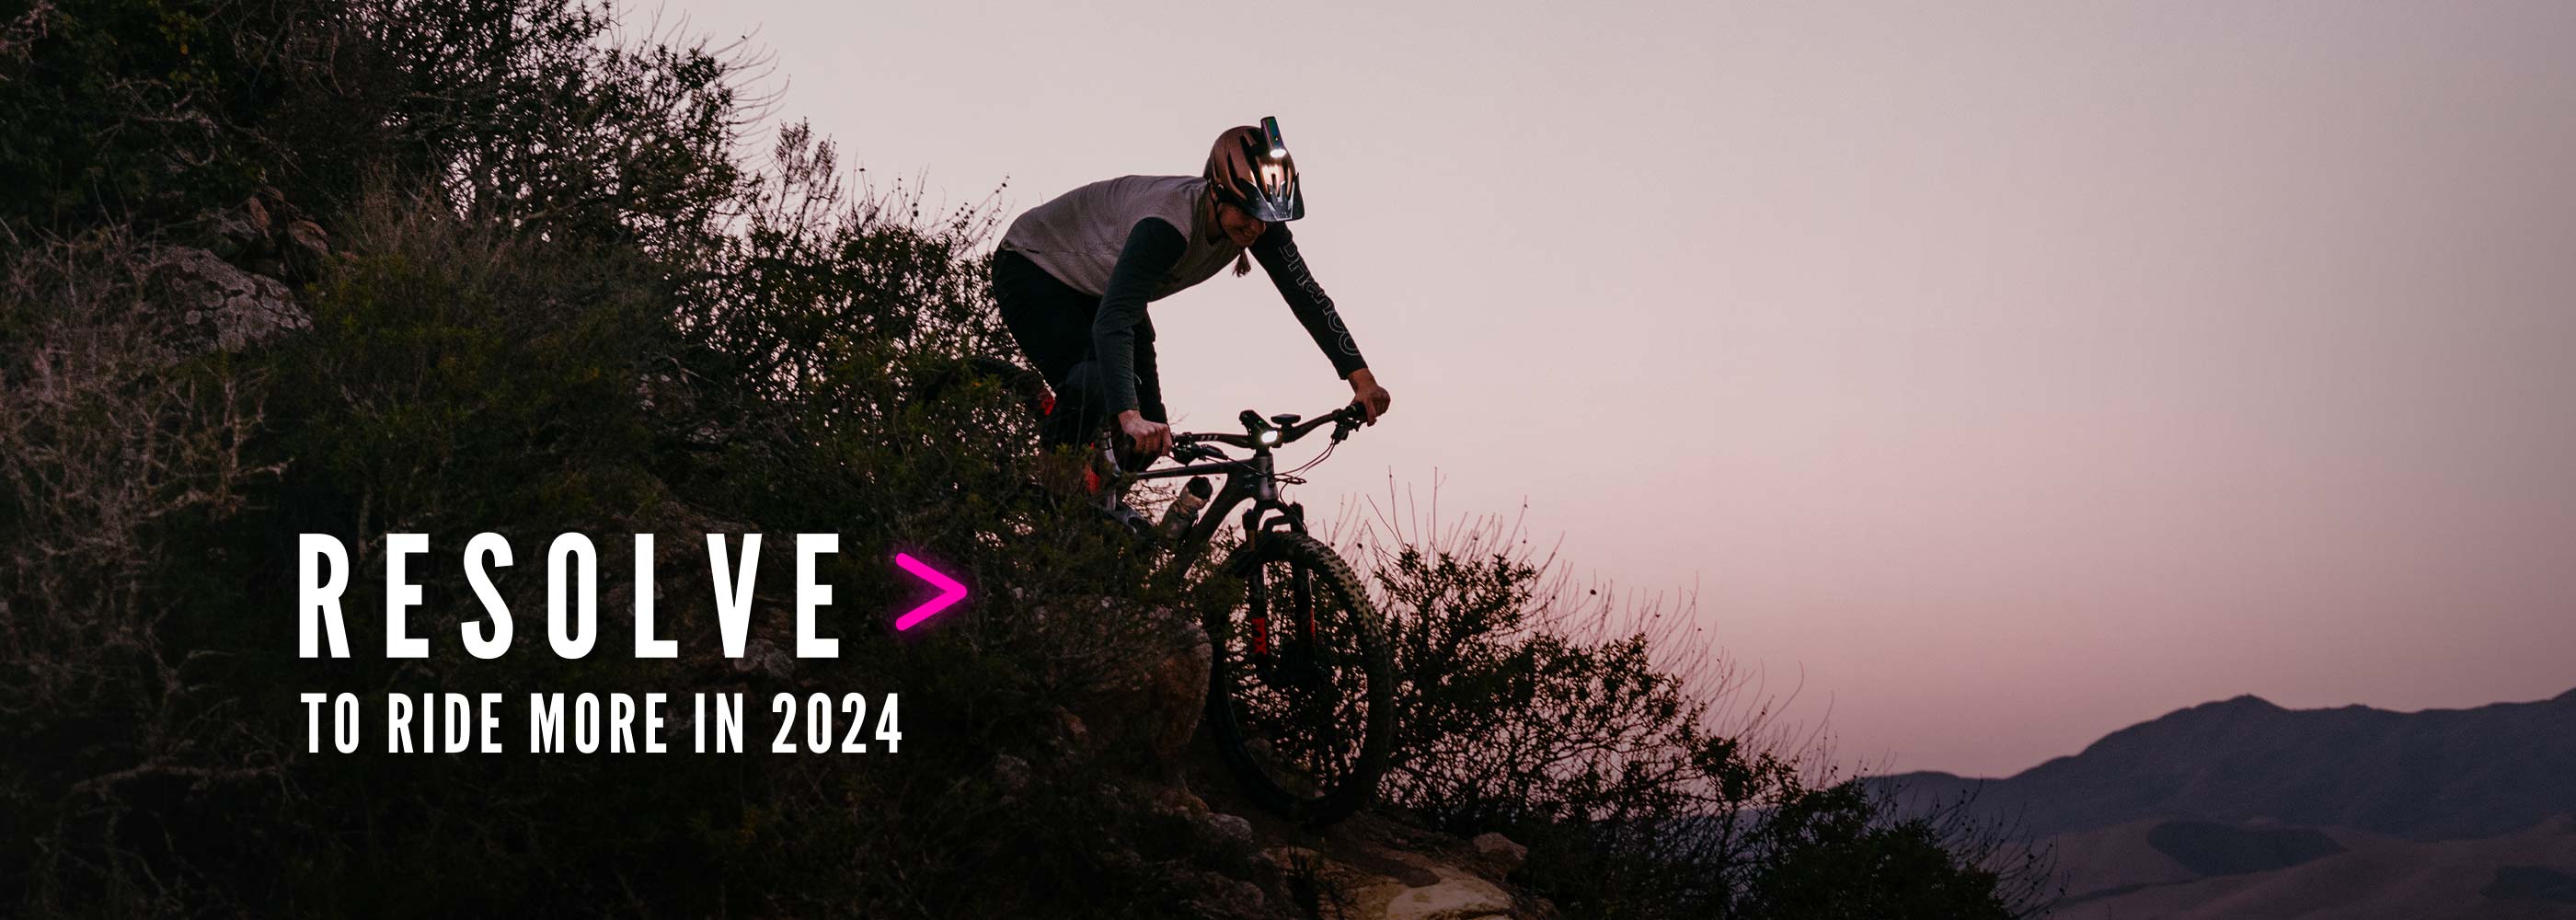 Bike rider descending down a mountain at dusk with lights with type that says 'Resolve to ride more in 2024'